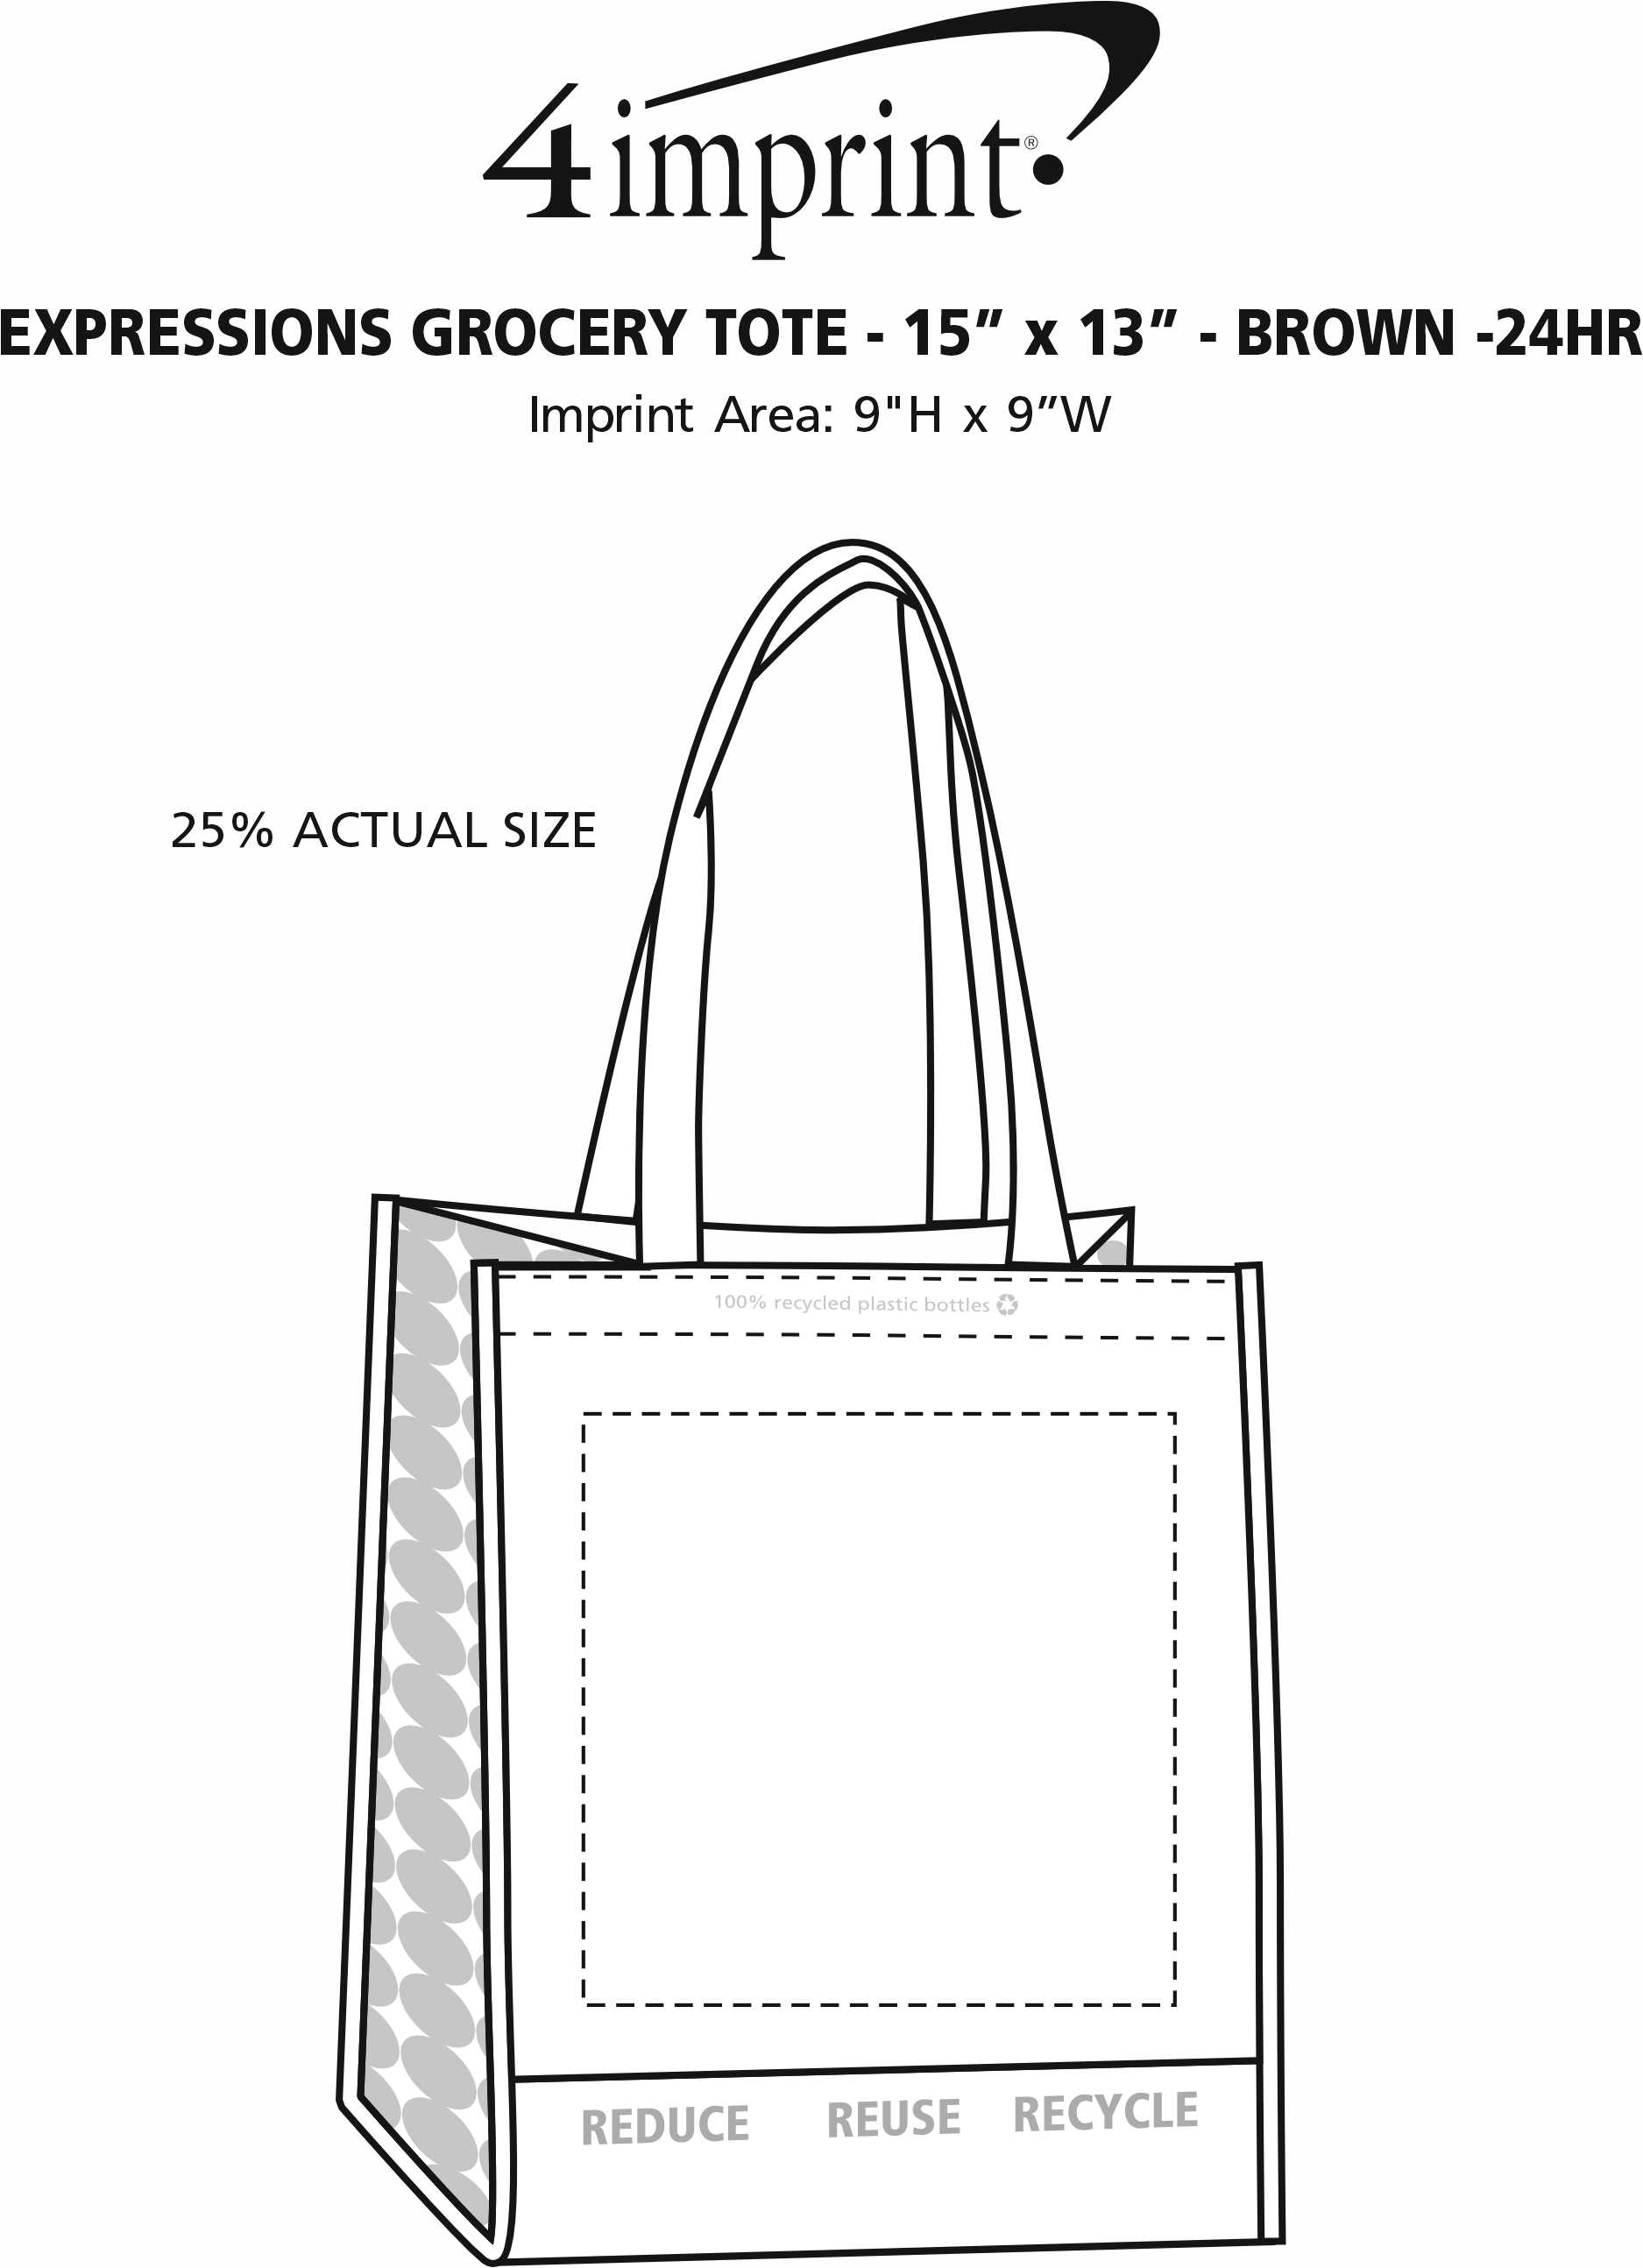 Imprint Area of Expressions Grocery Tote - Brown - 24 hr